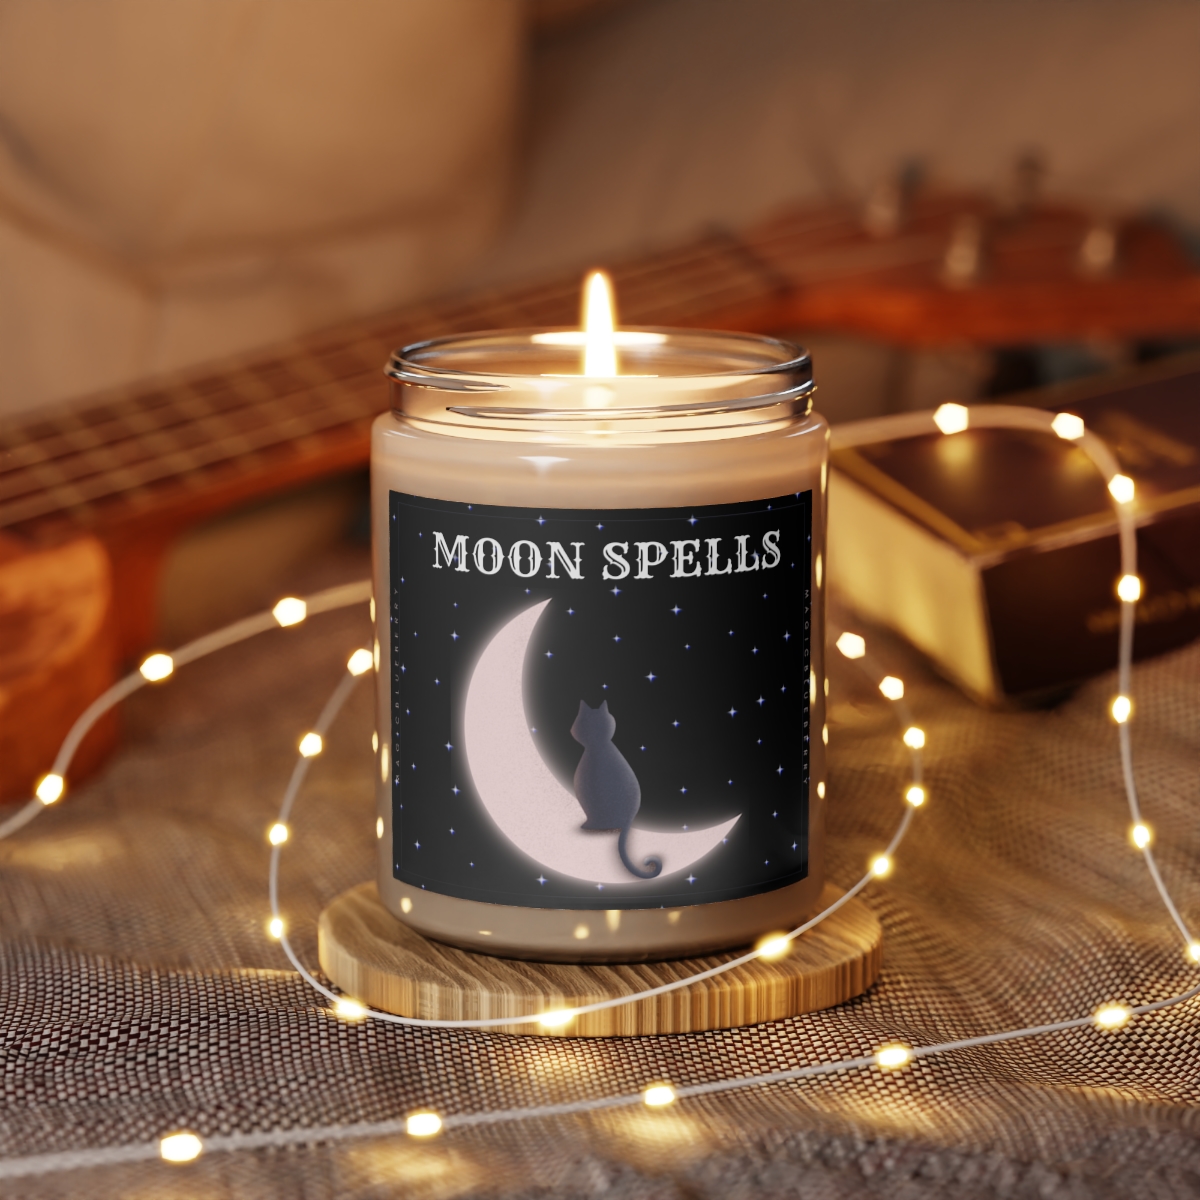 Moon Spells - Scented Vegan Soy Wax Candles, Clear Jar Candle, Spell Candles, Moon Candle, Vegan Candle, Cotton Wick Candle product main image